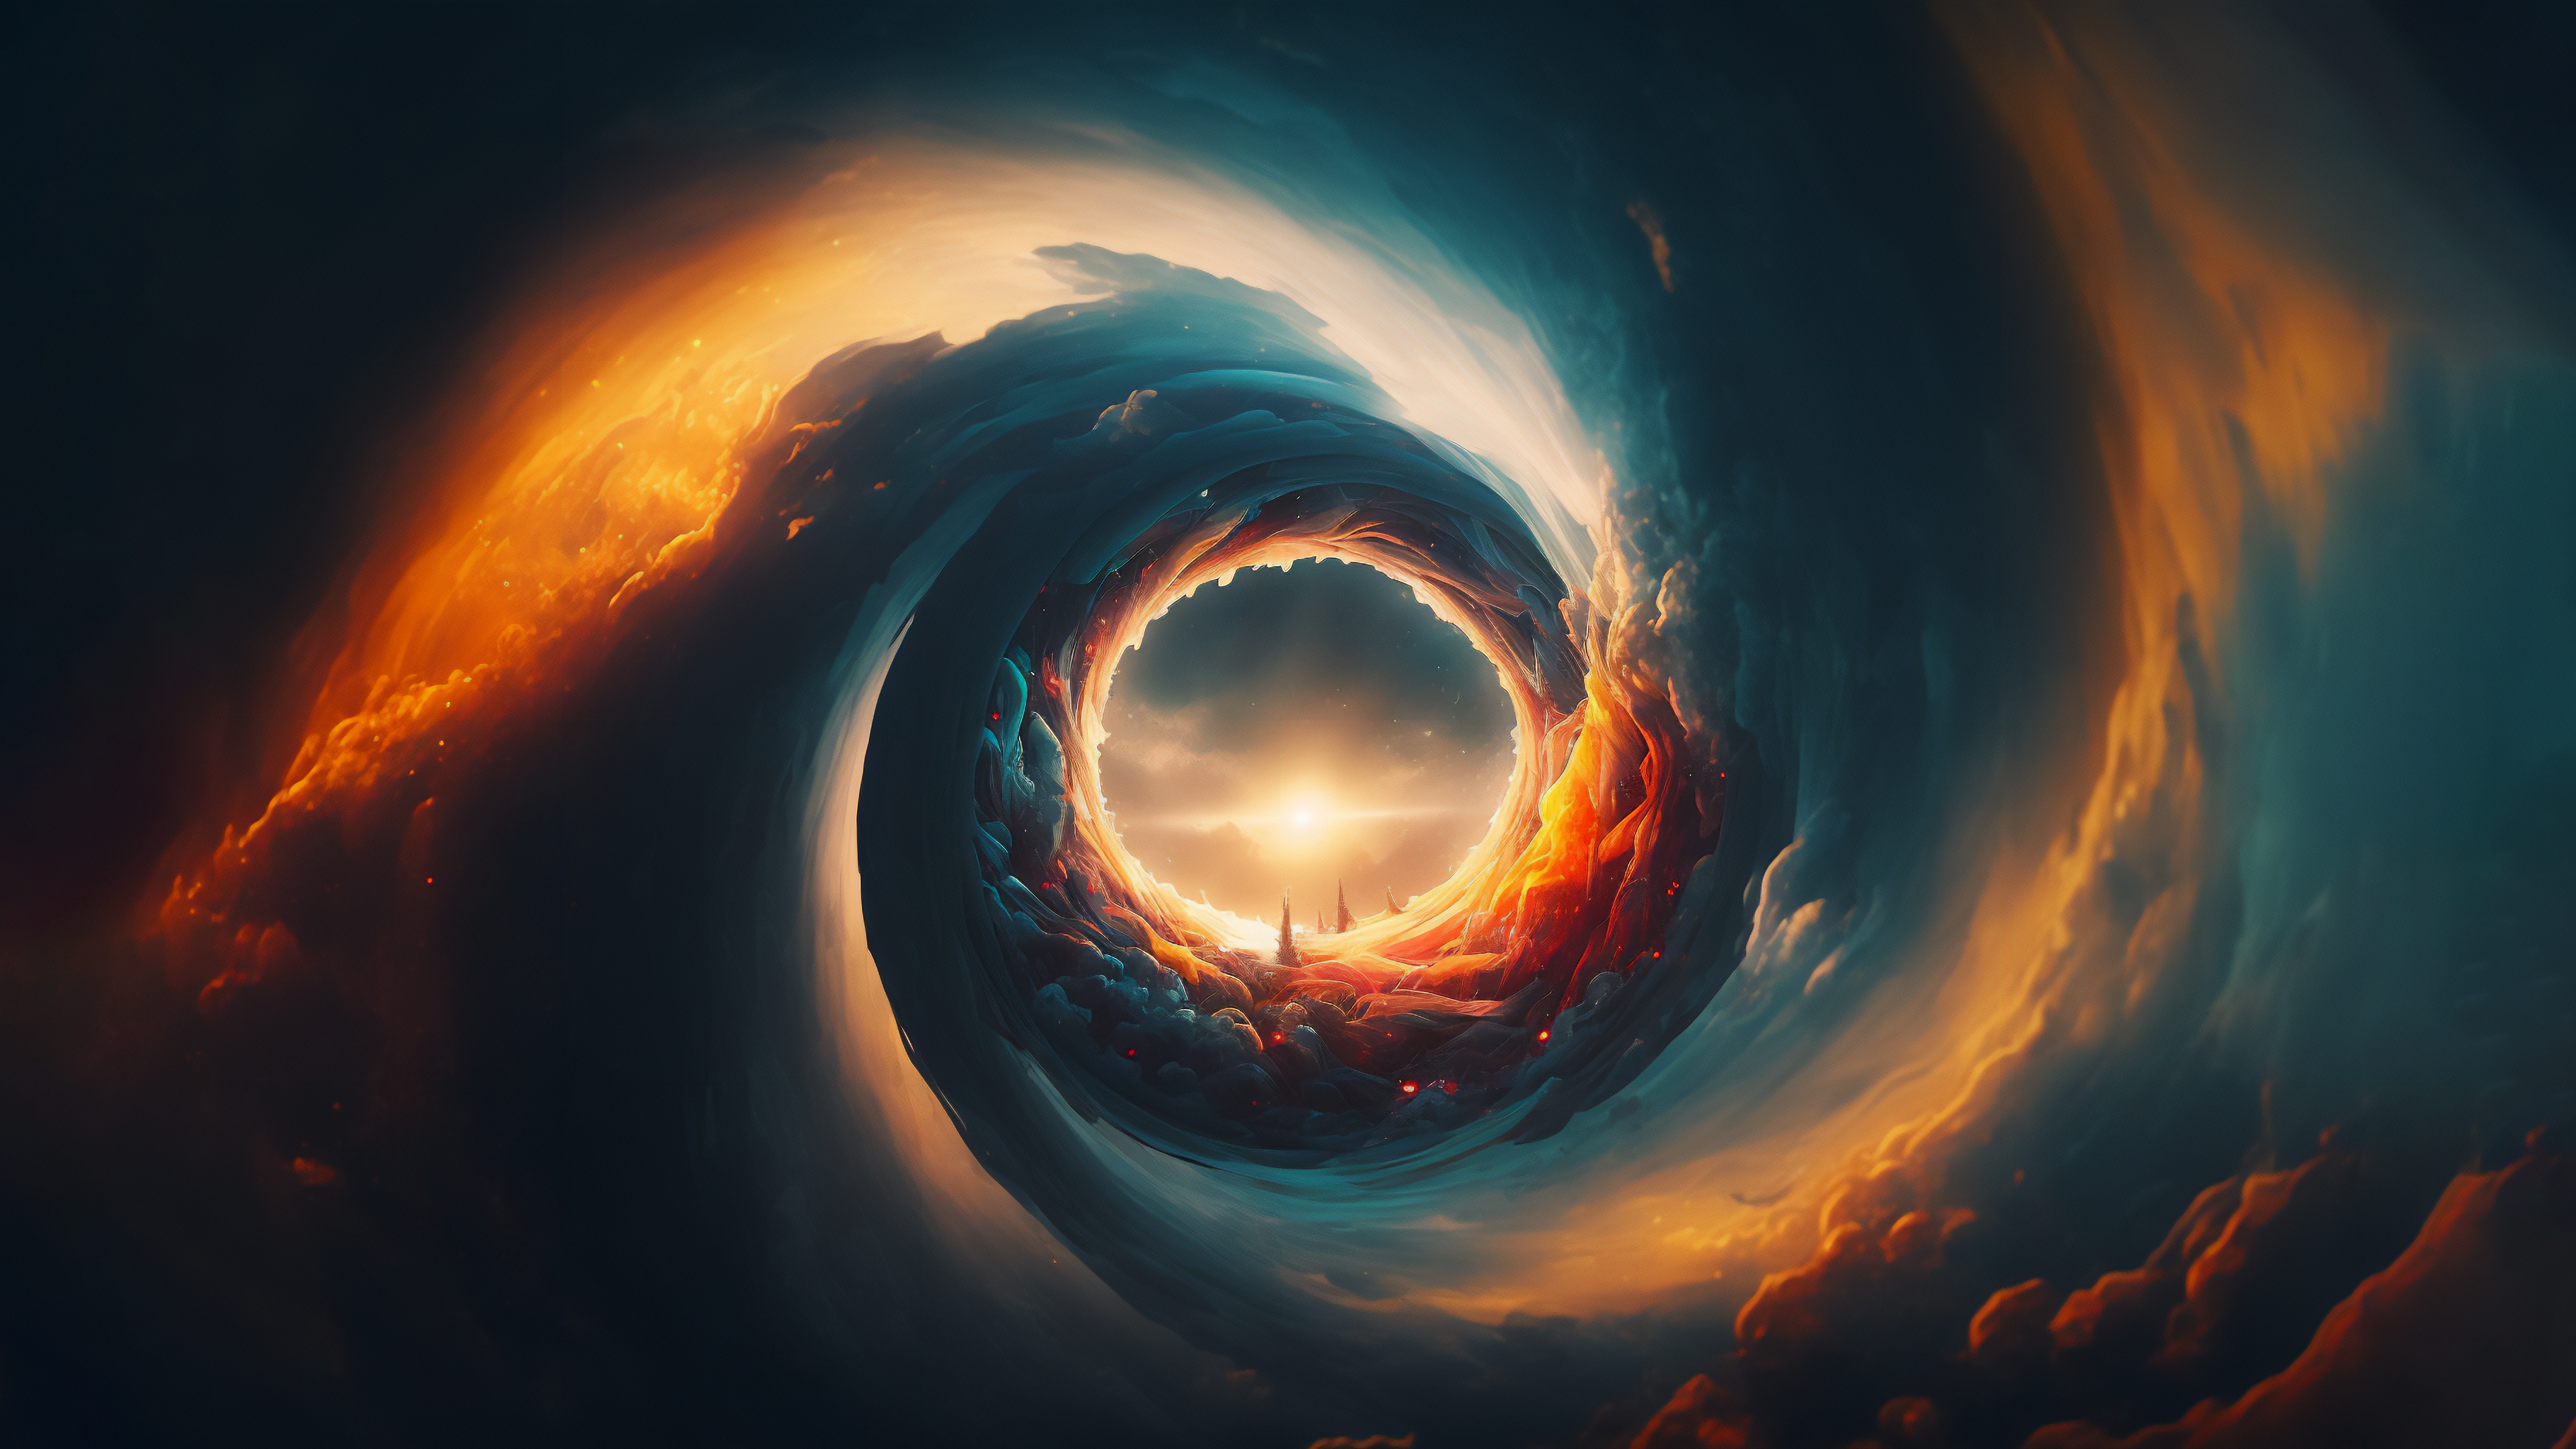 Razor Vortex on Wallpaper Engine 1010 would recommend  rwallpapers